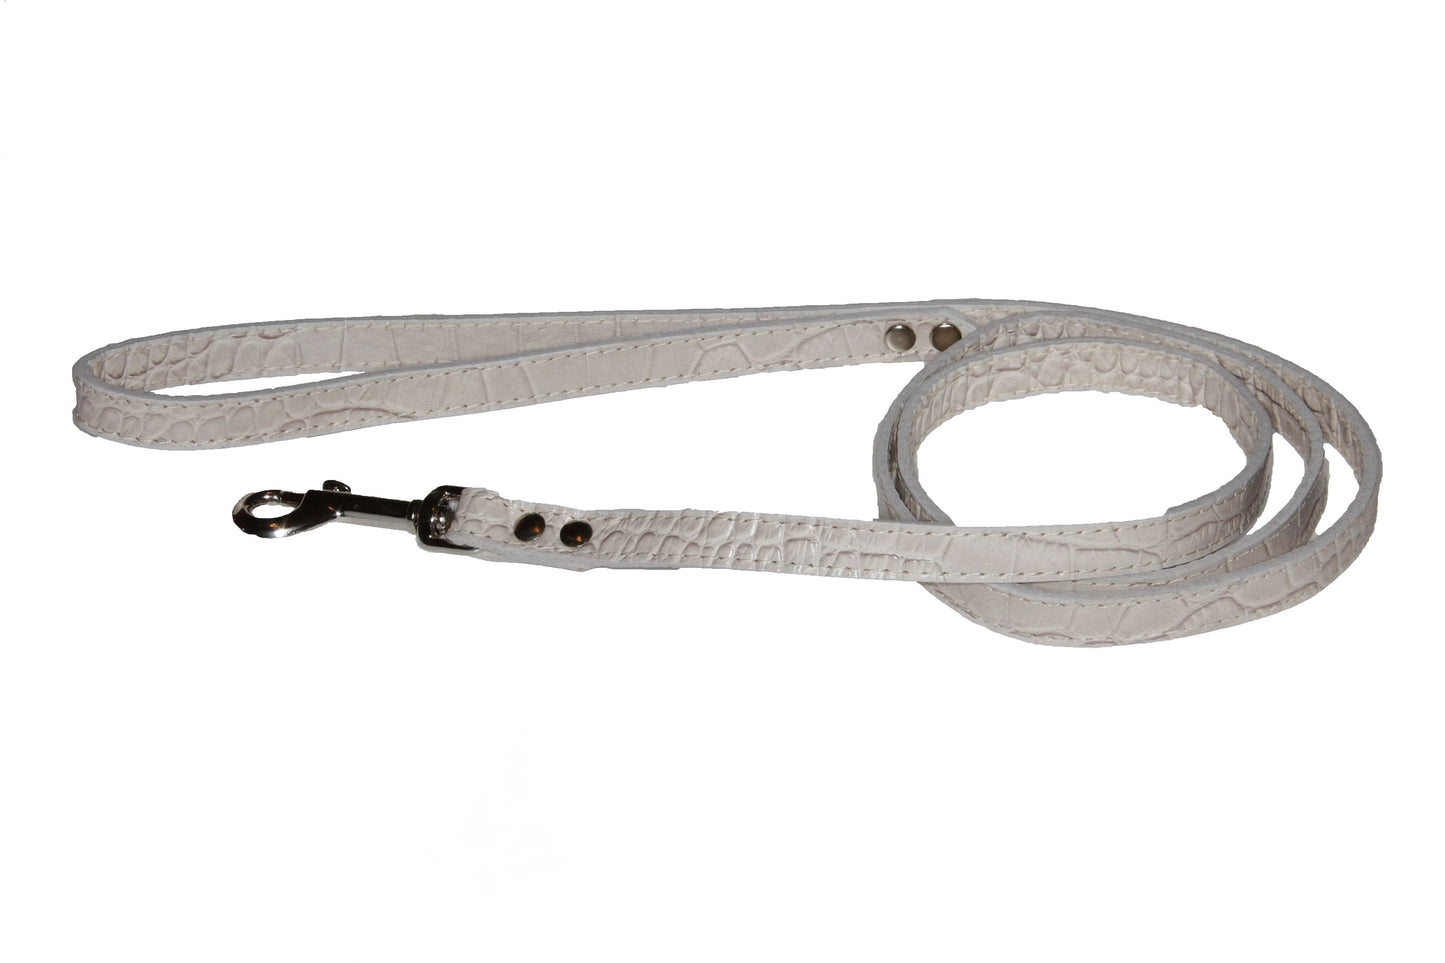 Ostrich Leather Leads to Match ORIGINAL ChokeFree™ Ostrich Leather Harnesses